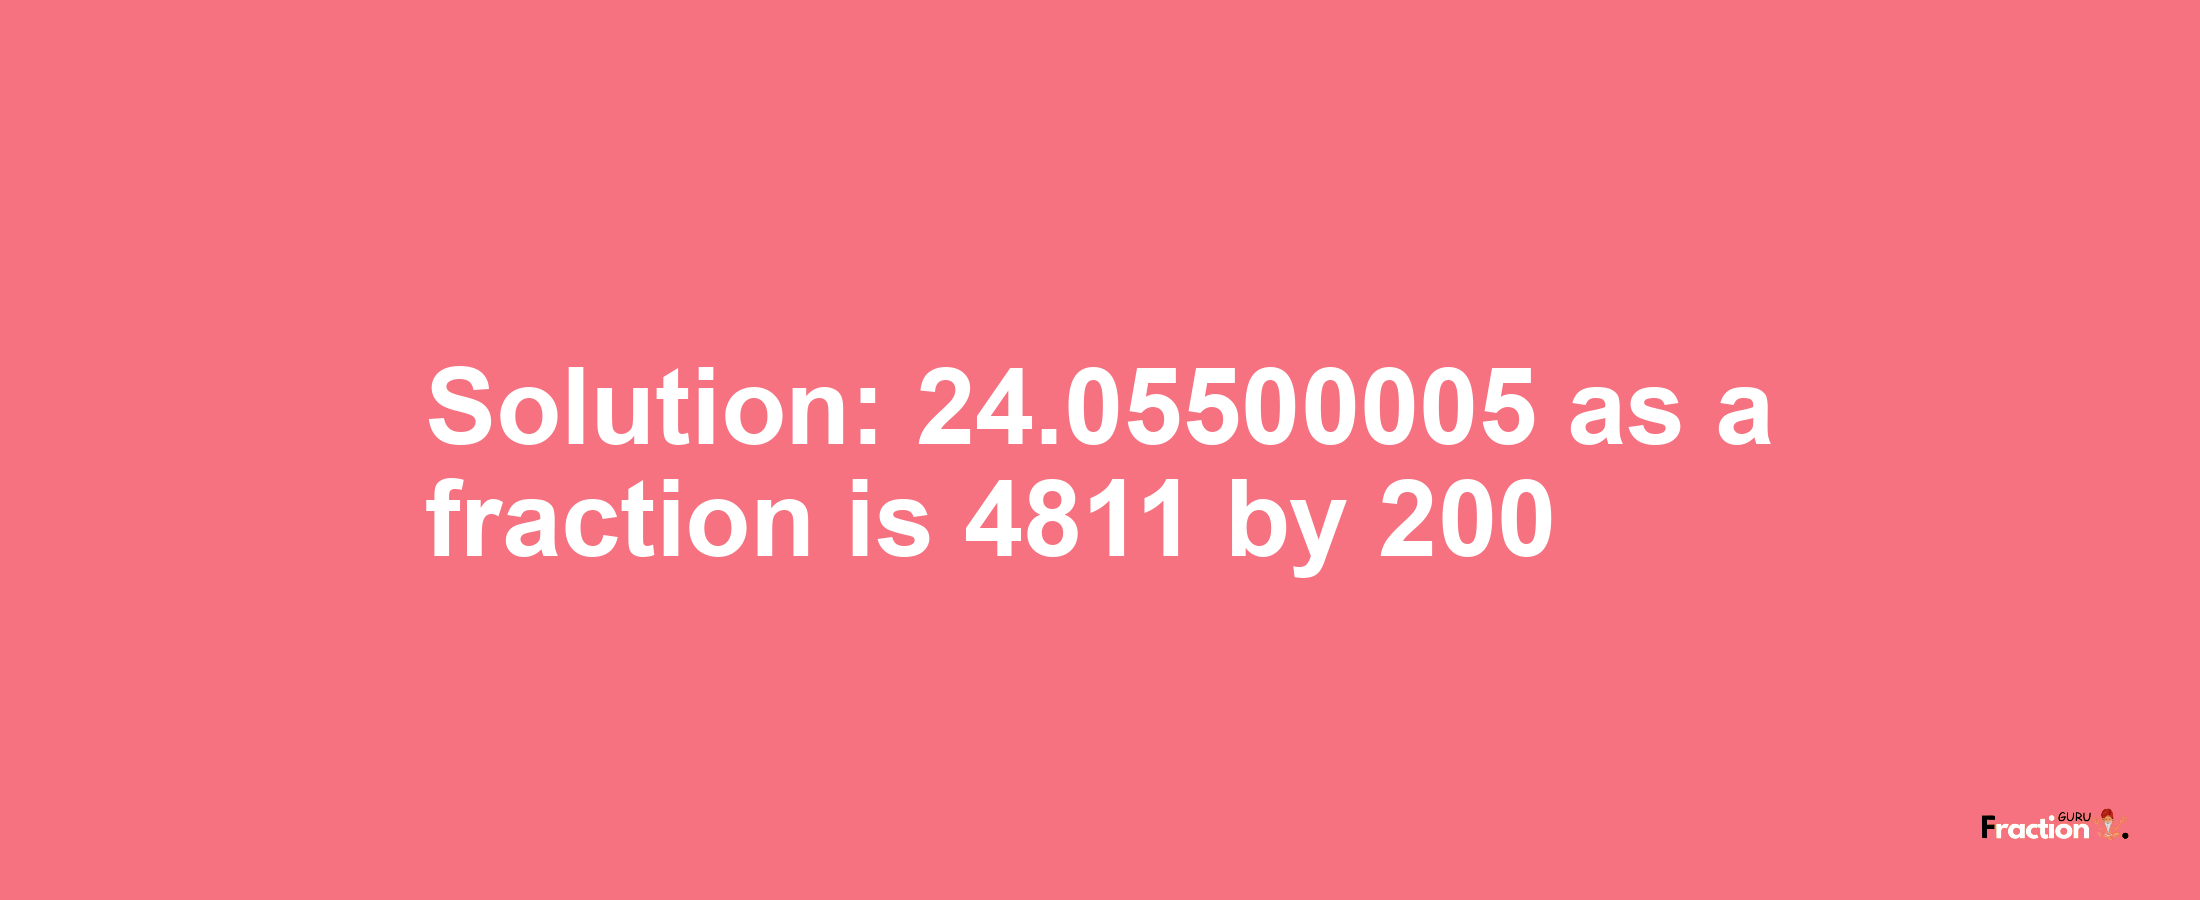 Solution:24.05500005 as a fraction is 4811/200